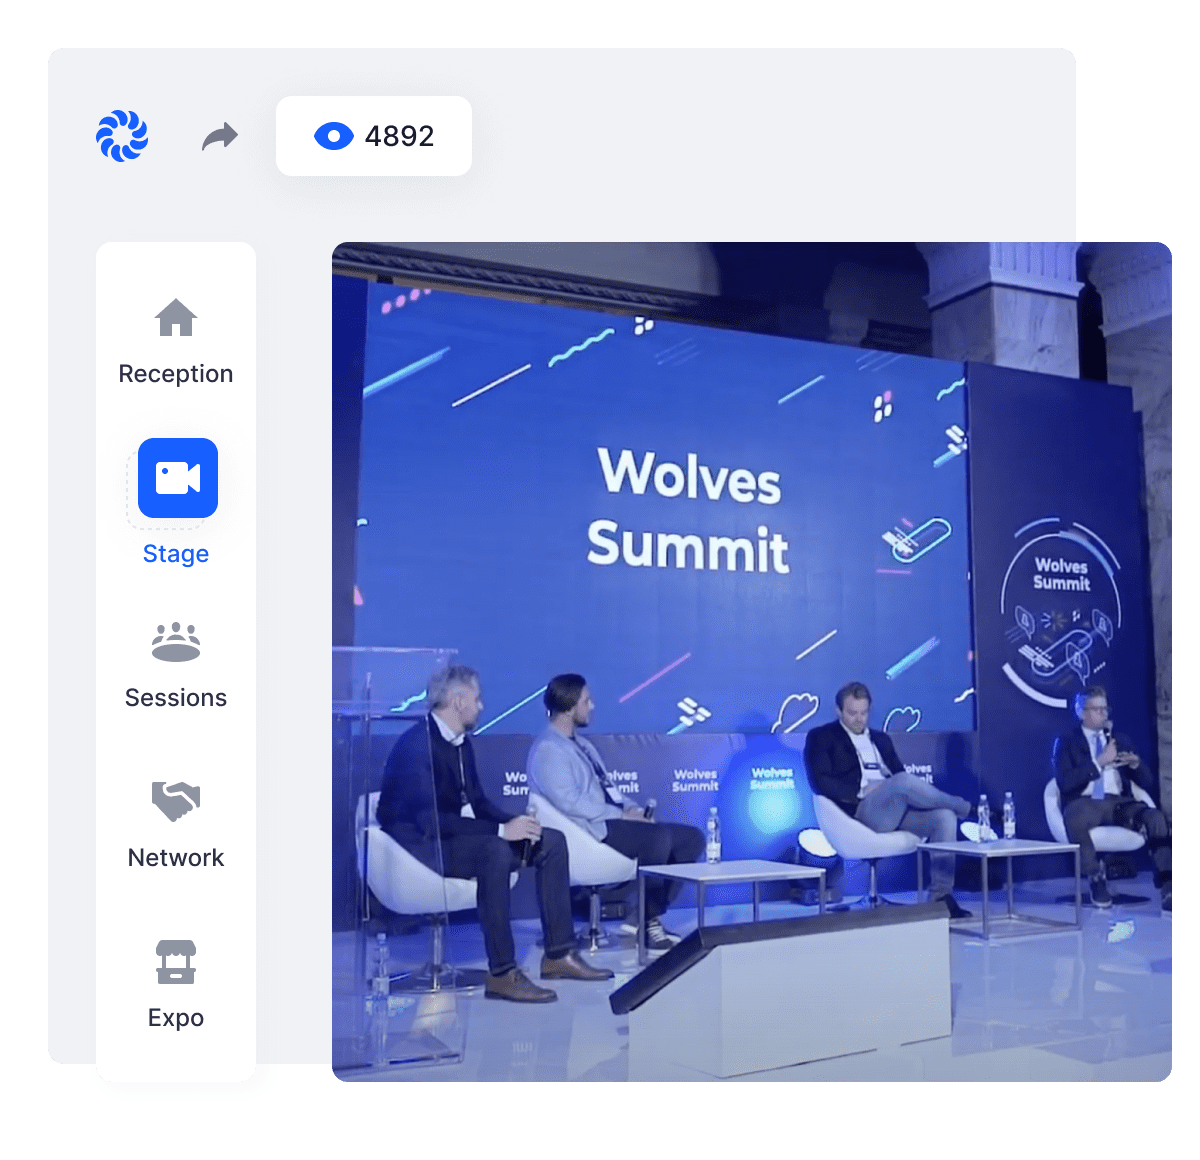  Event speakers sitting onstage at Wolves Summit which was created using Hopin's event agency platform and services